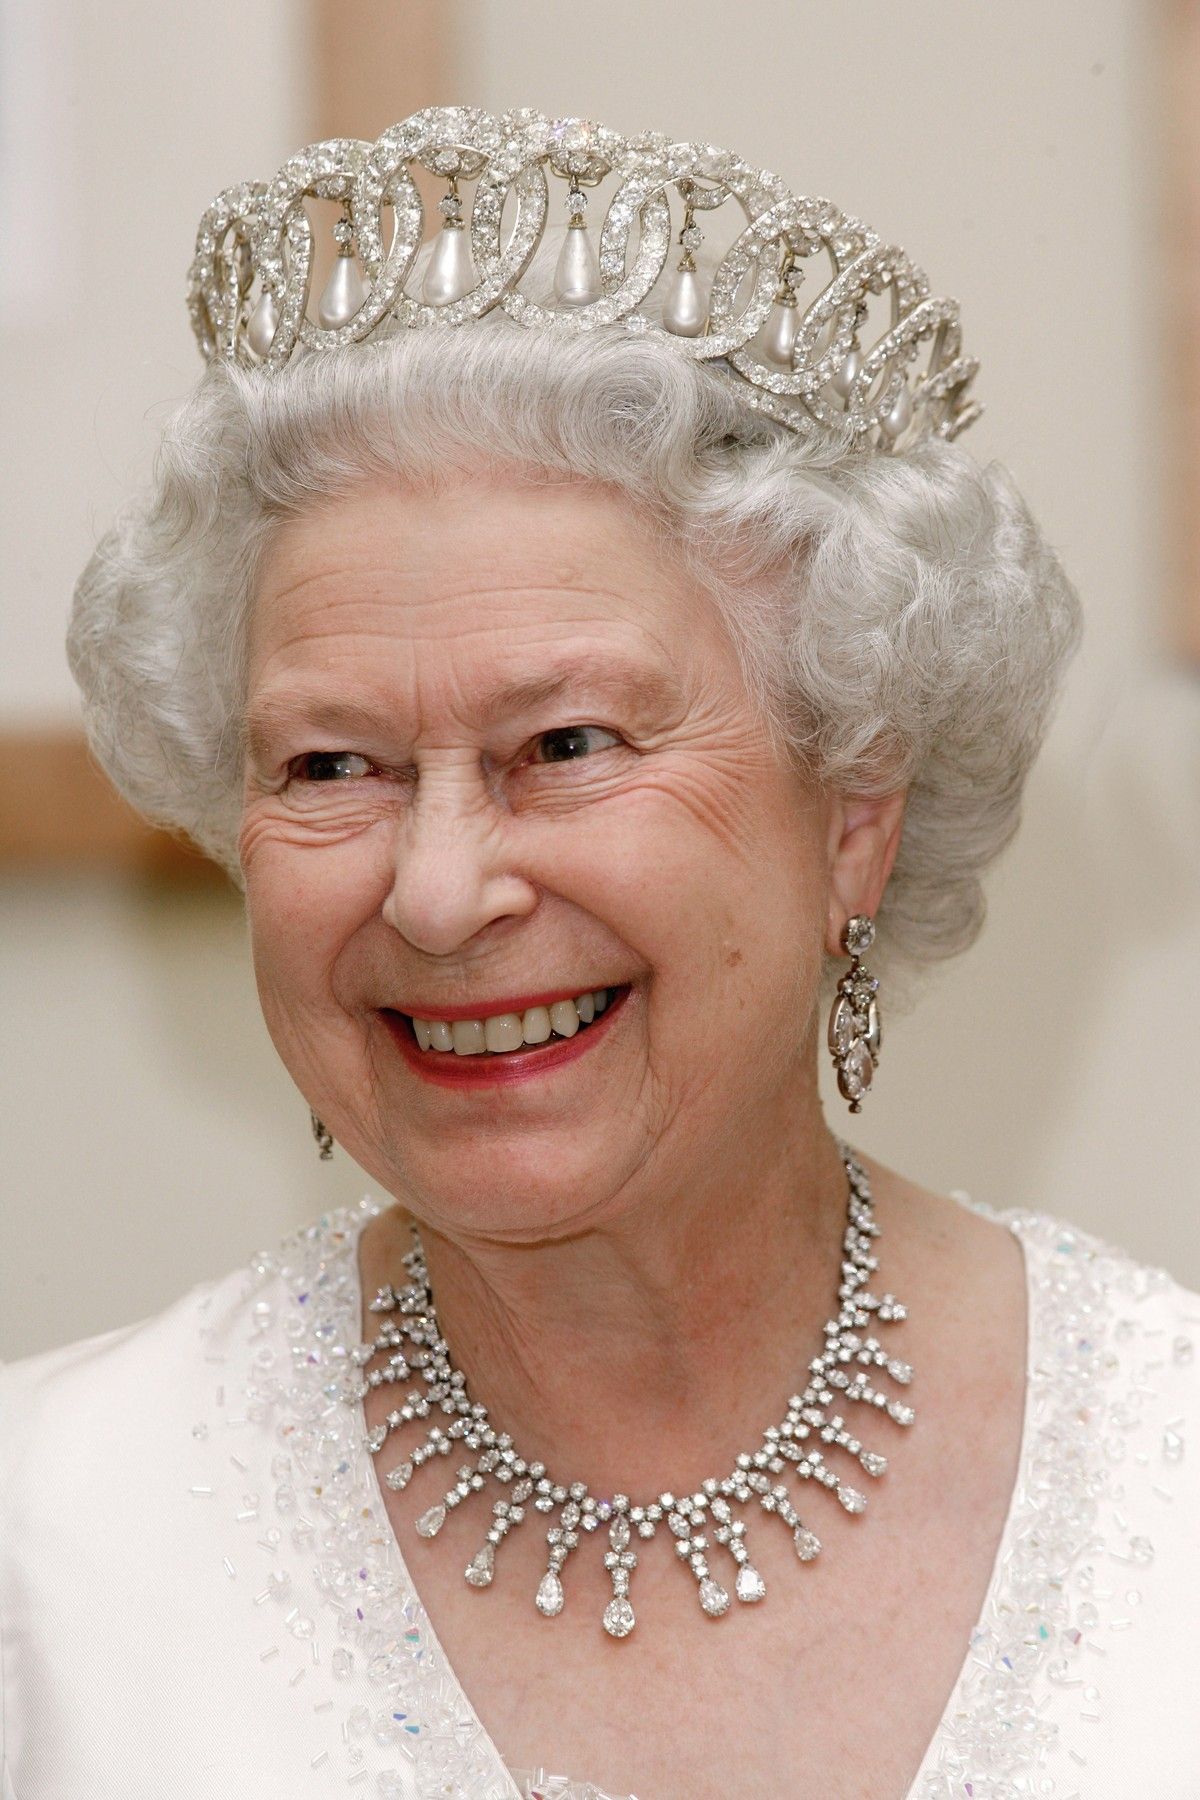 Queen of great britain. Дели Дурбар тиара.